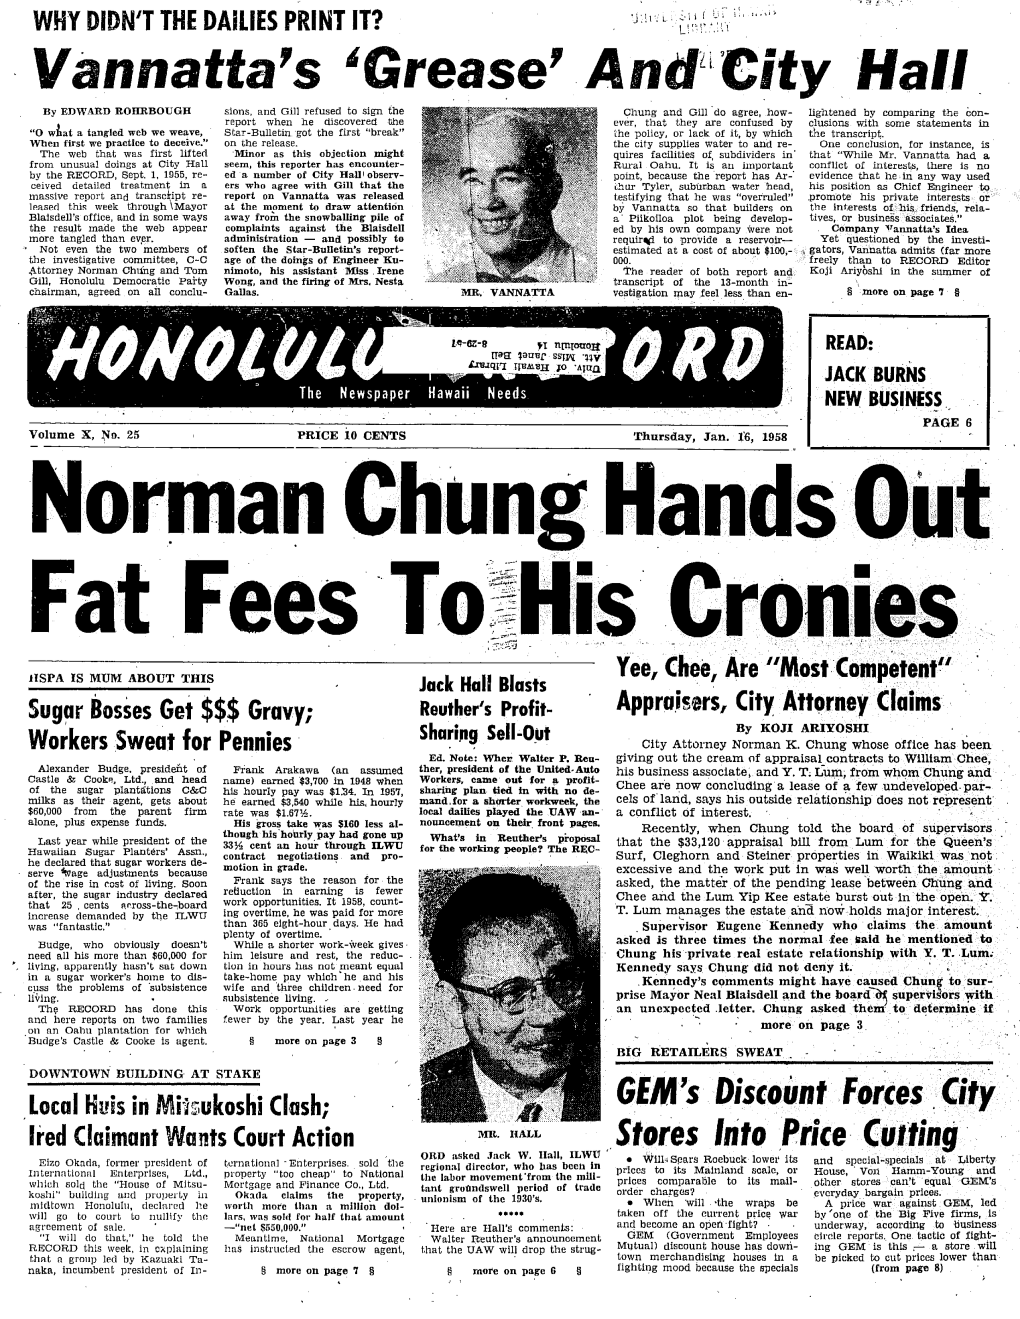 Norman Chung Hands out Fat Fees to His Cronies